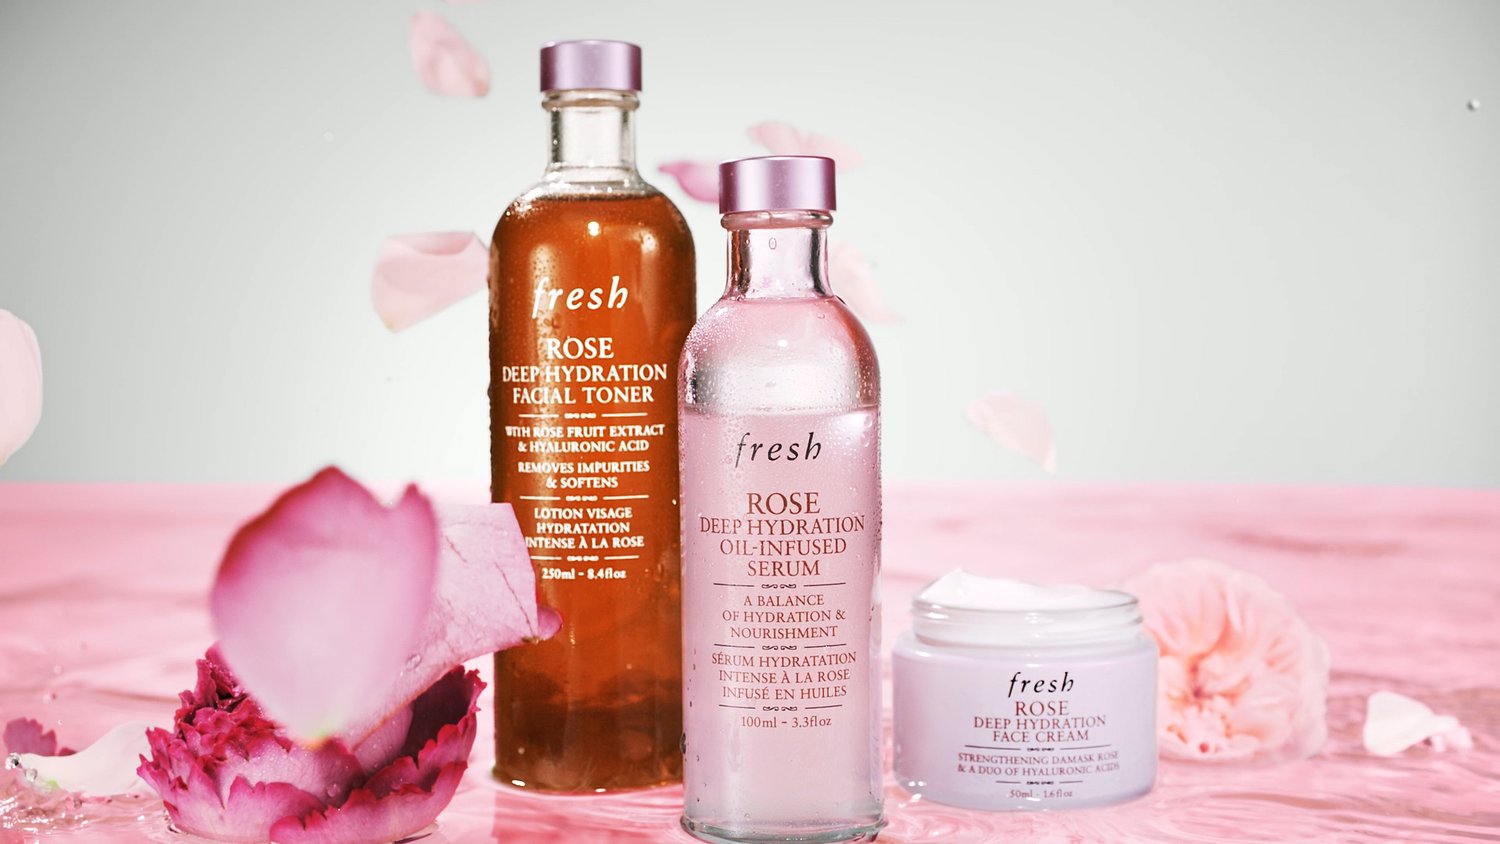 LVMH beauty brand, Fresh, engaged MOSS to provide editing and post